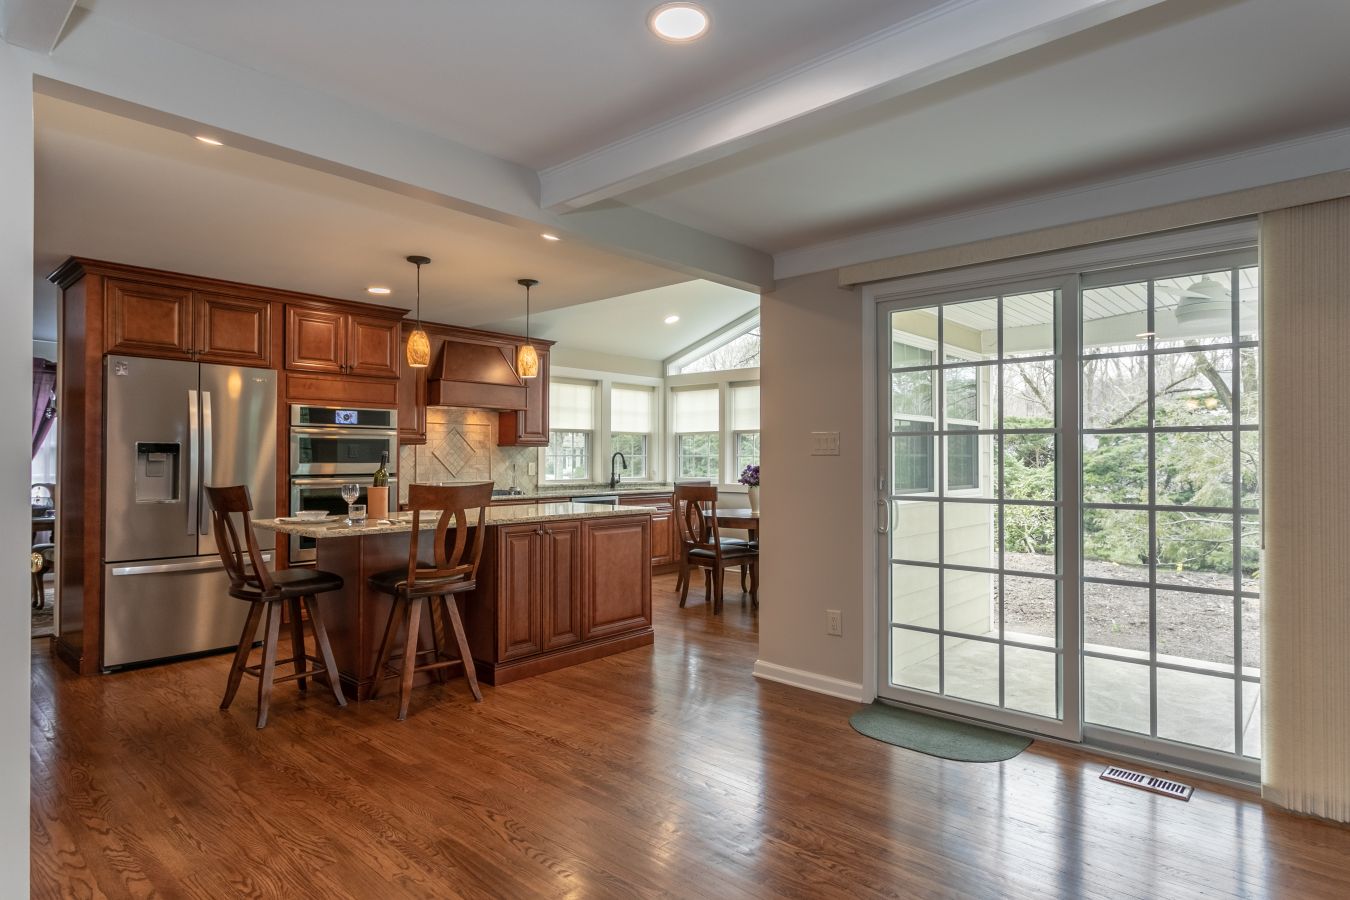 Kitchen with brown cabinets and center island